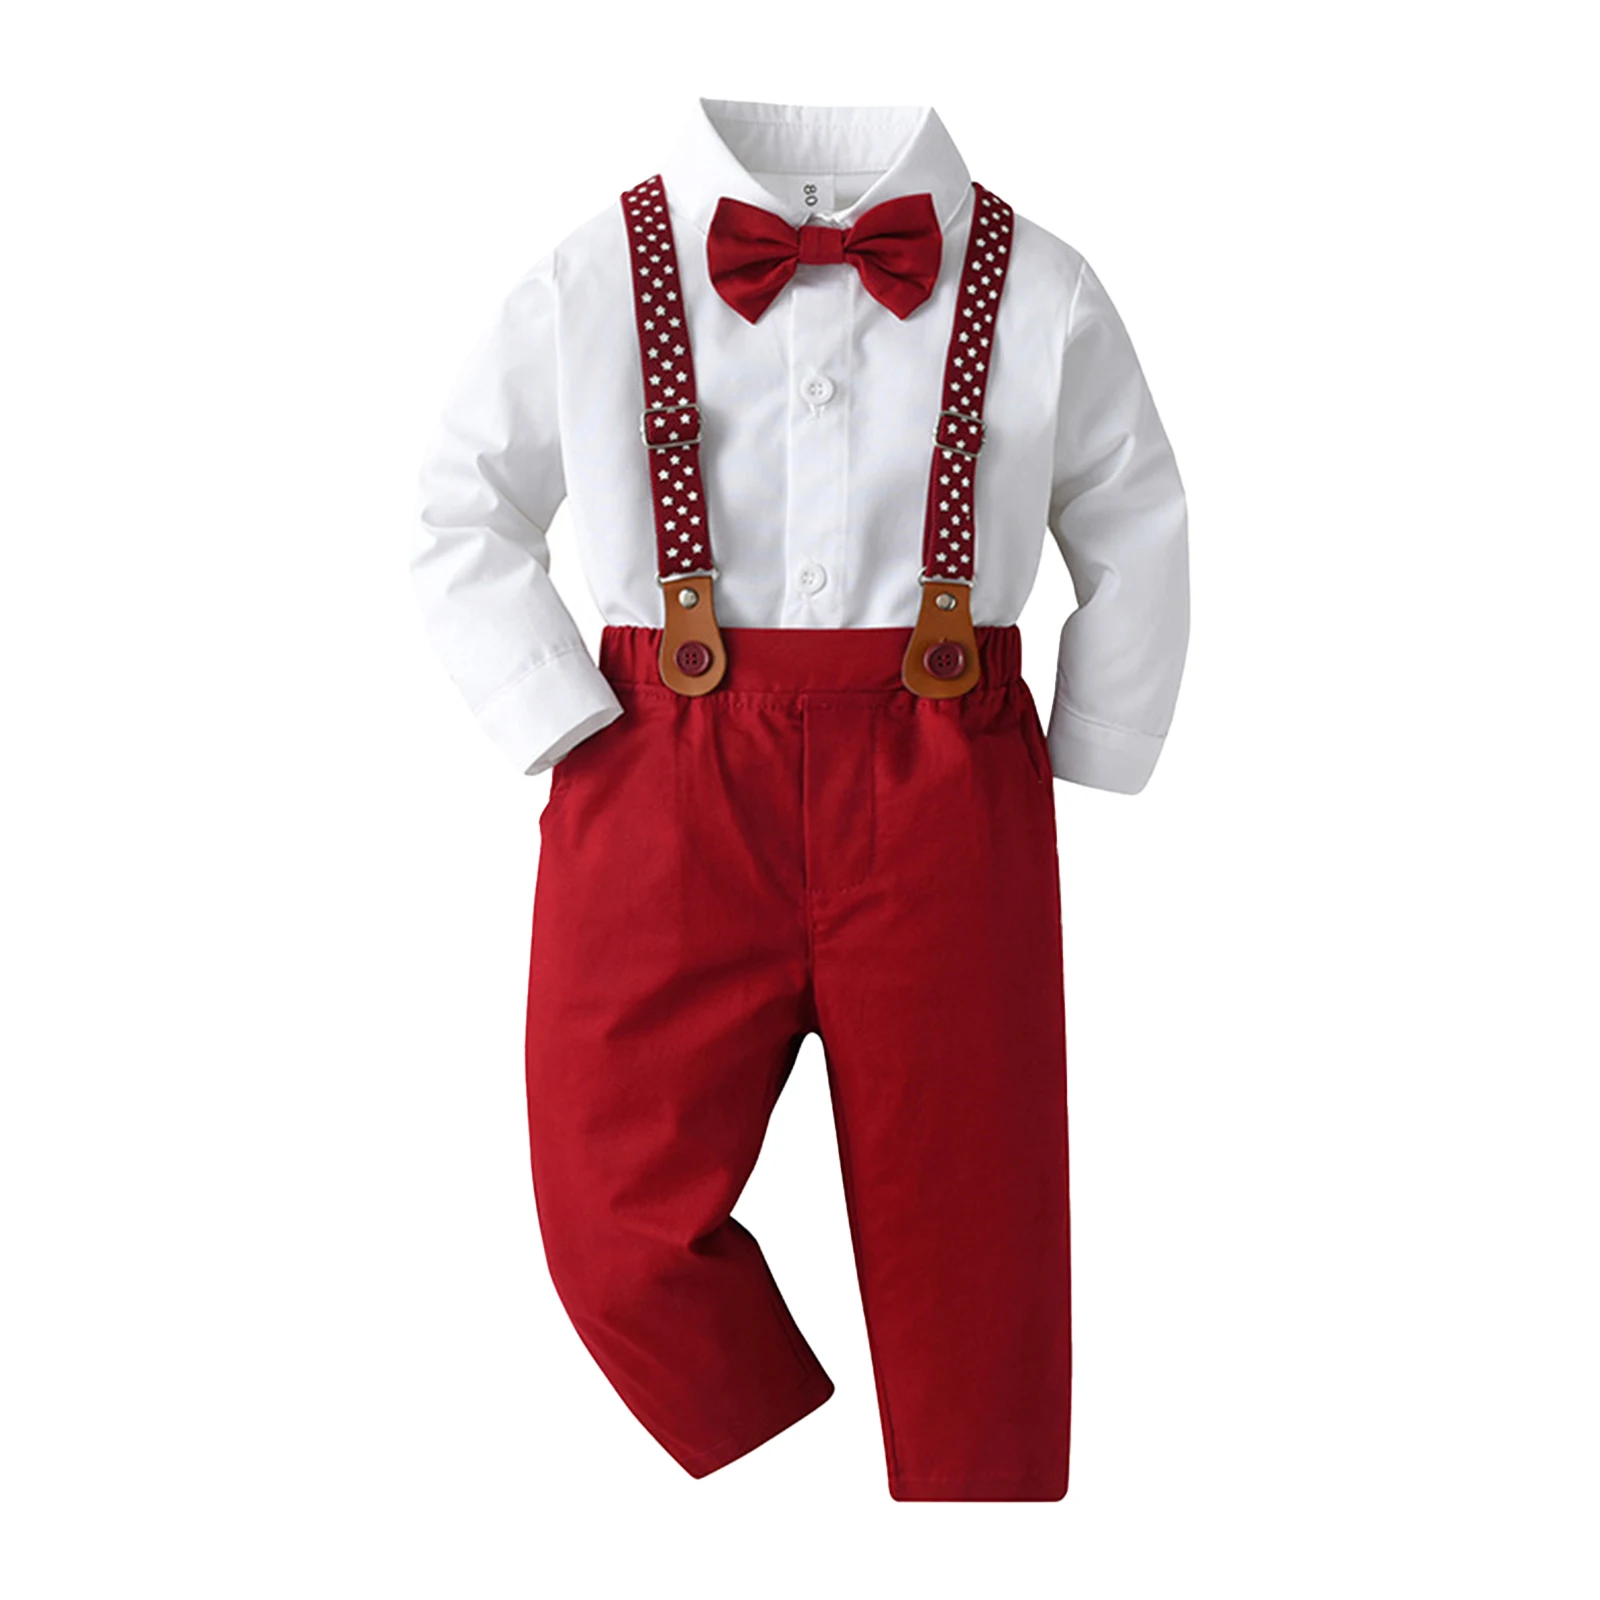 Baby Boys Gentleman Outfit Cotton Clothes Birthday Party Wedding Prom Gown Long Sleeve Shirt Top+Bowtie+Suspender Pants 3Pcs/Set 2023 summer men s suit african ethnic casual style 2 piece sets printed long sleeve top pants gentleman fashion clothes outfits